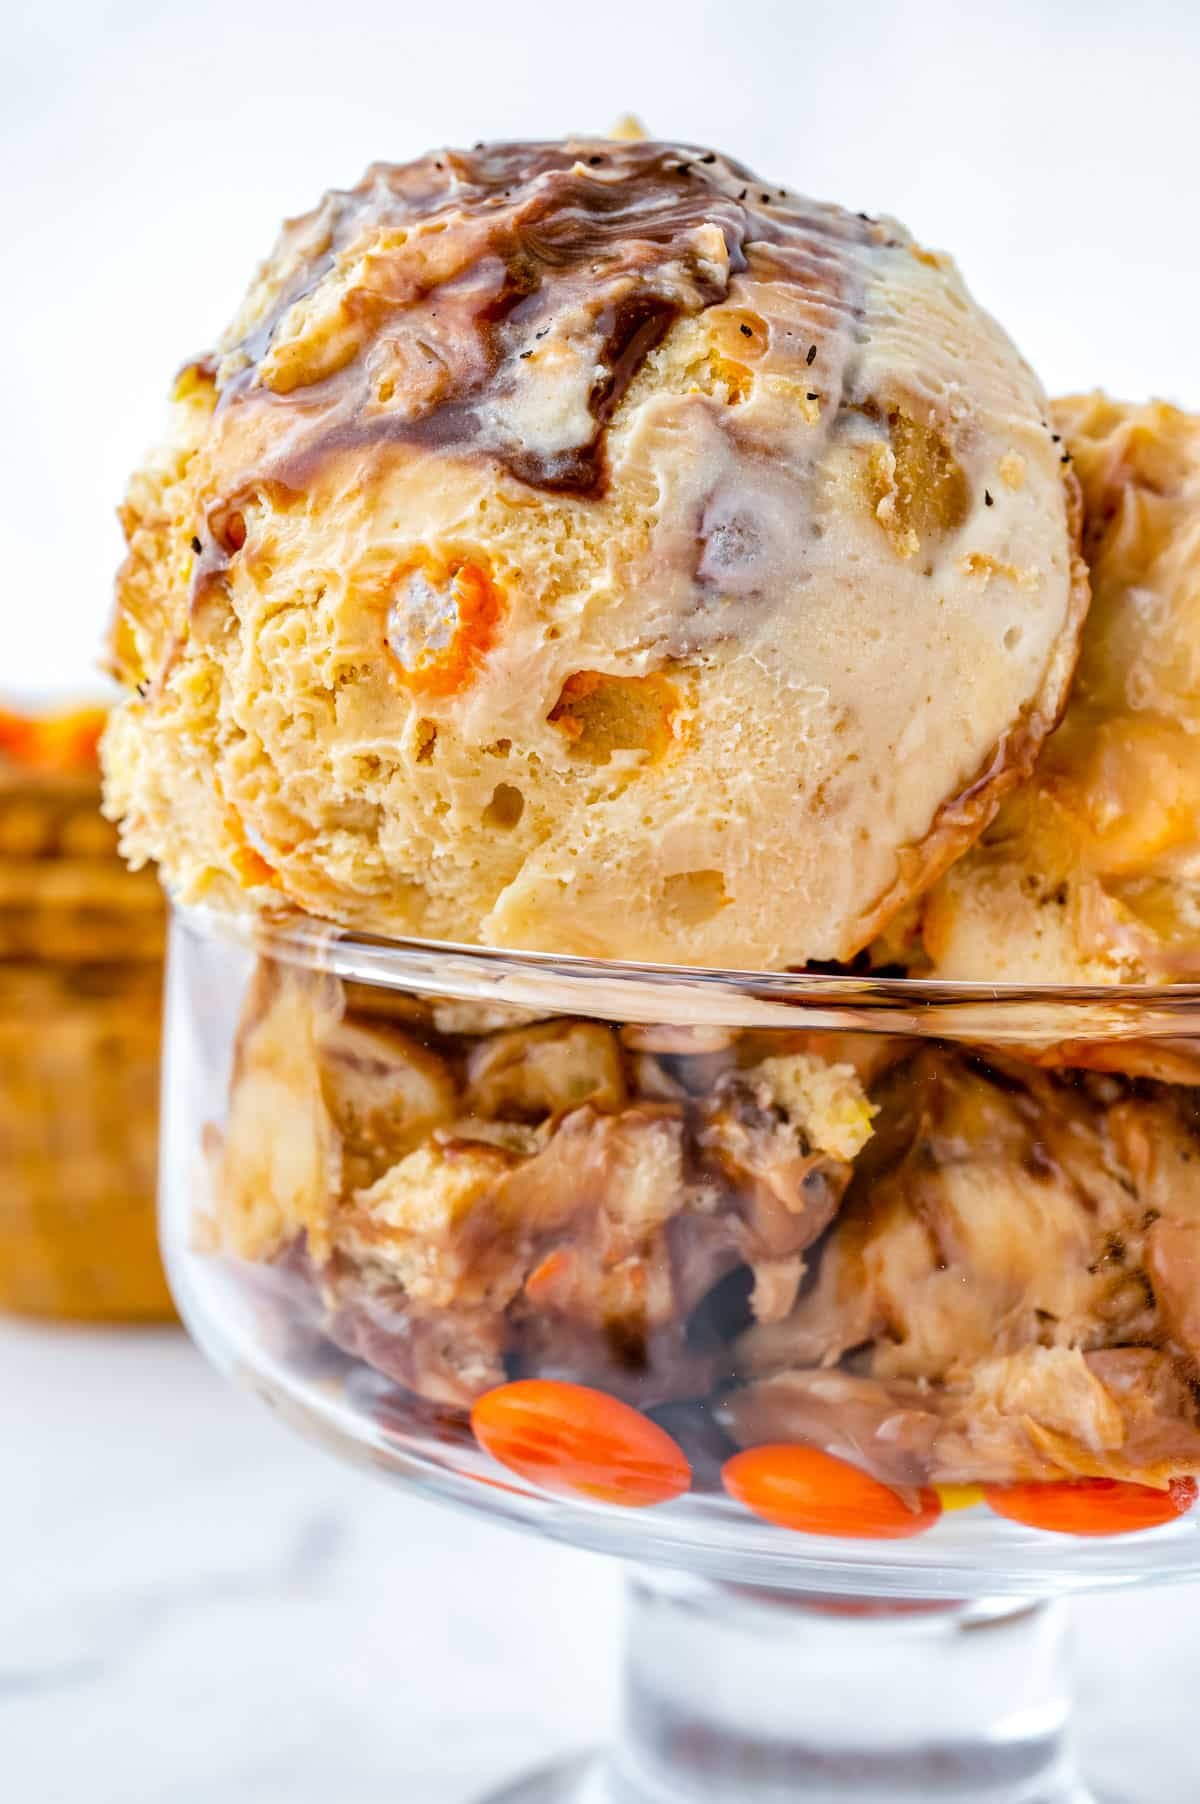 A close up picture of scoops of Reese's Ice Cream in a glass bowl.